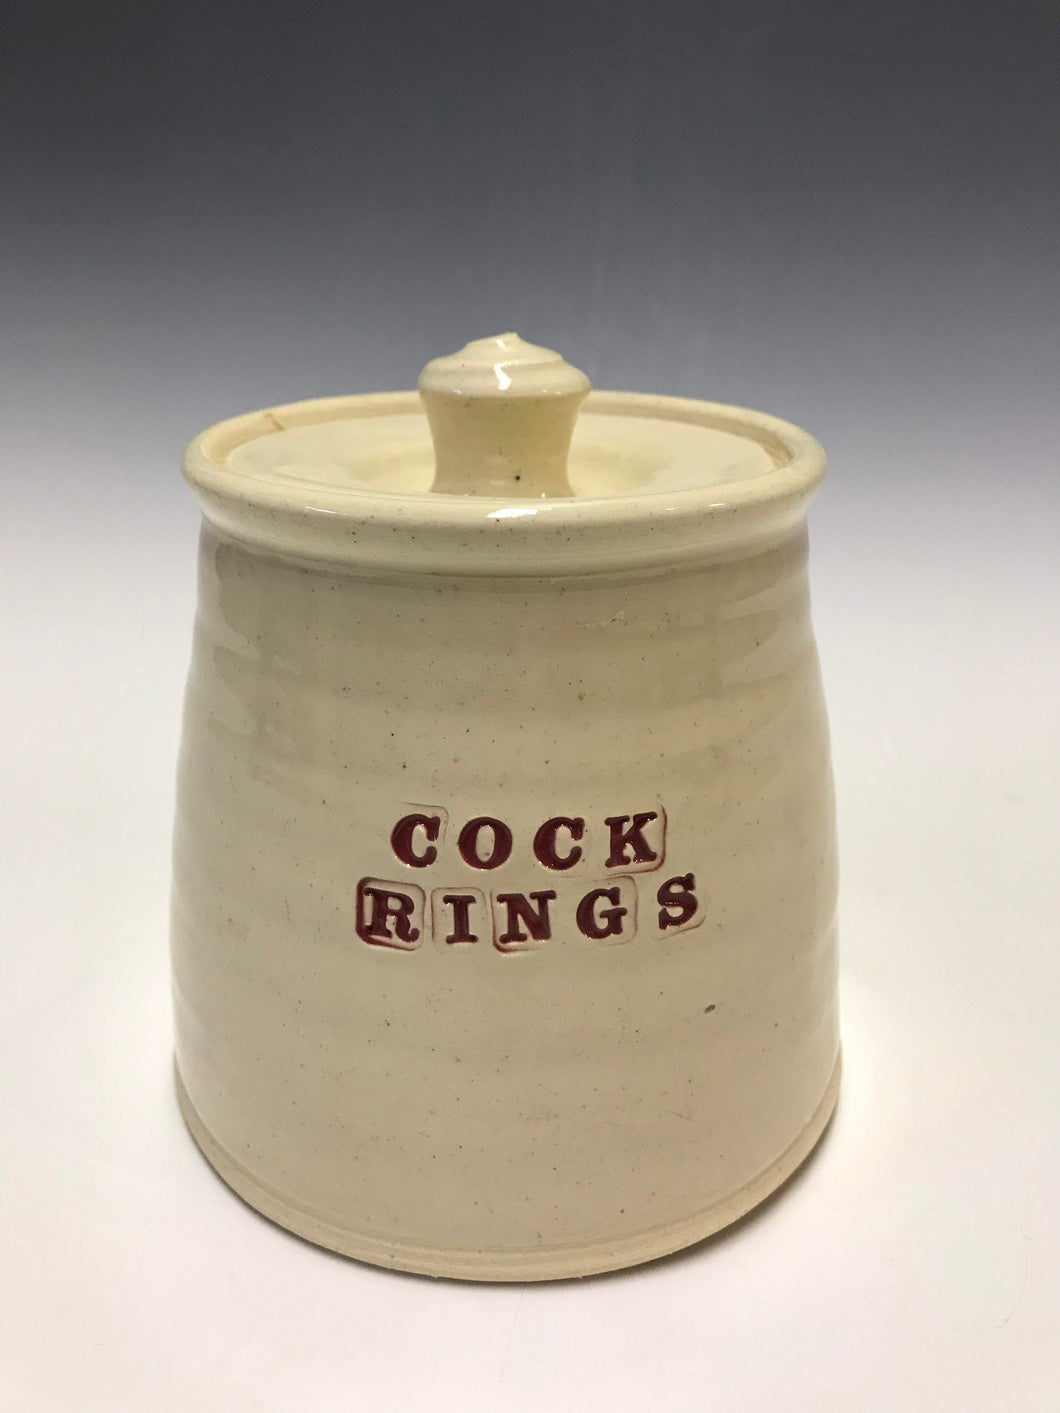 Cock ring jar to hold those embarrassing items on your bathroom vanity.